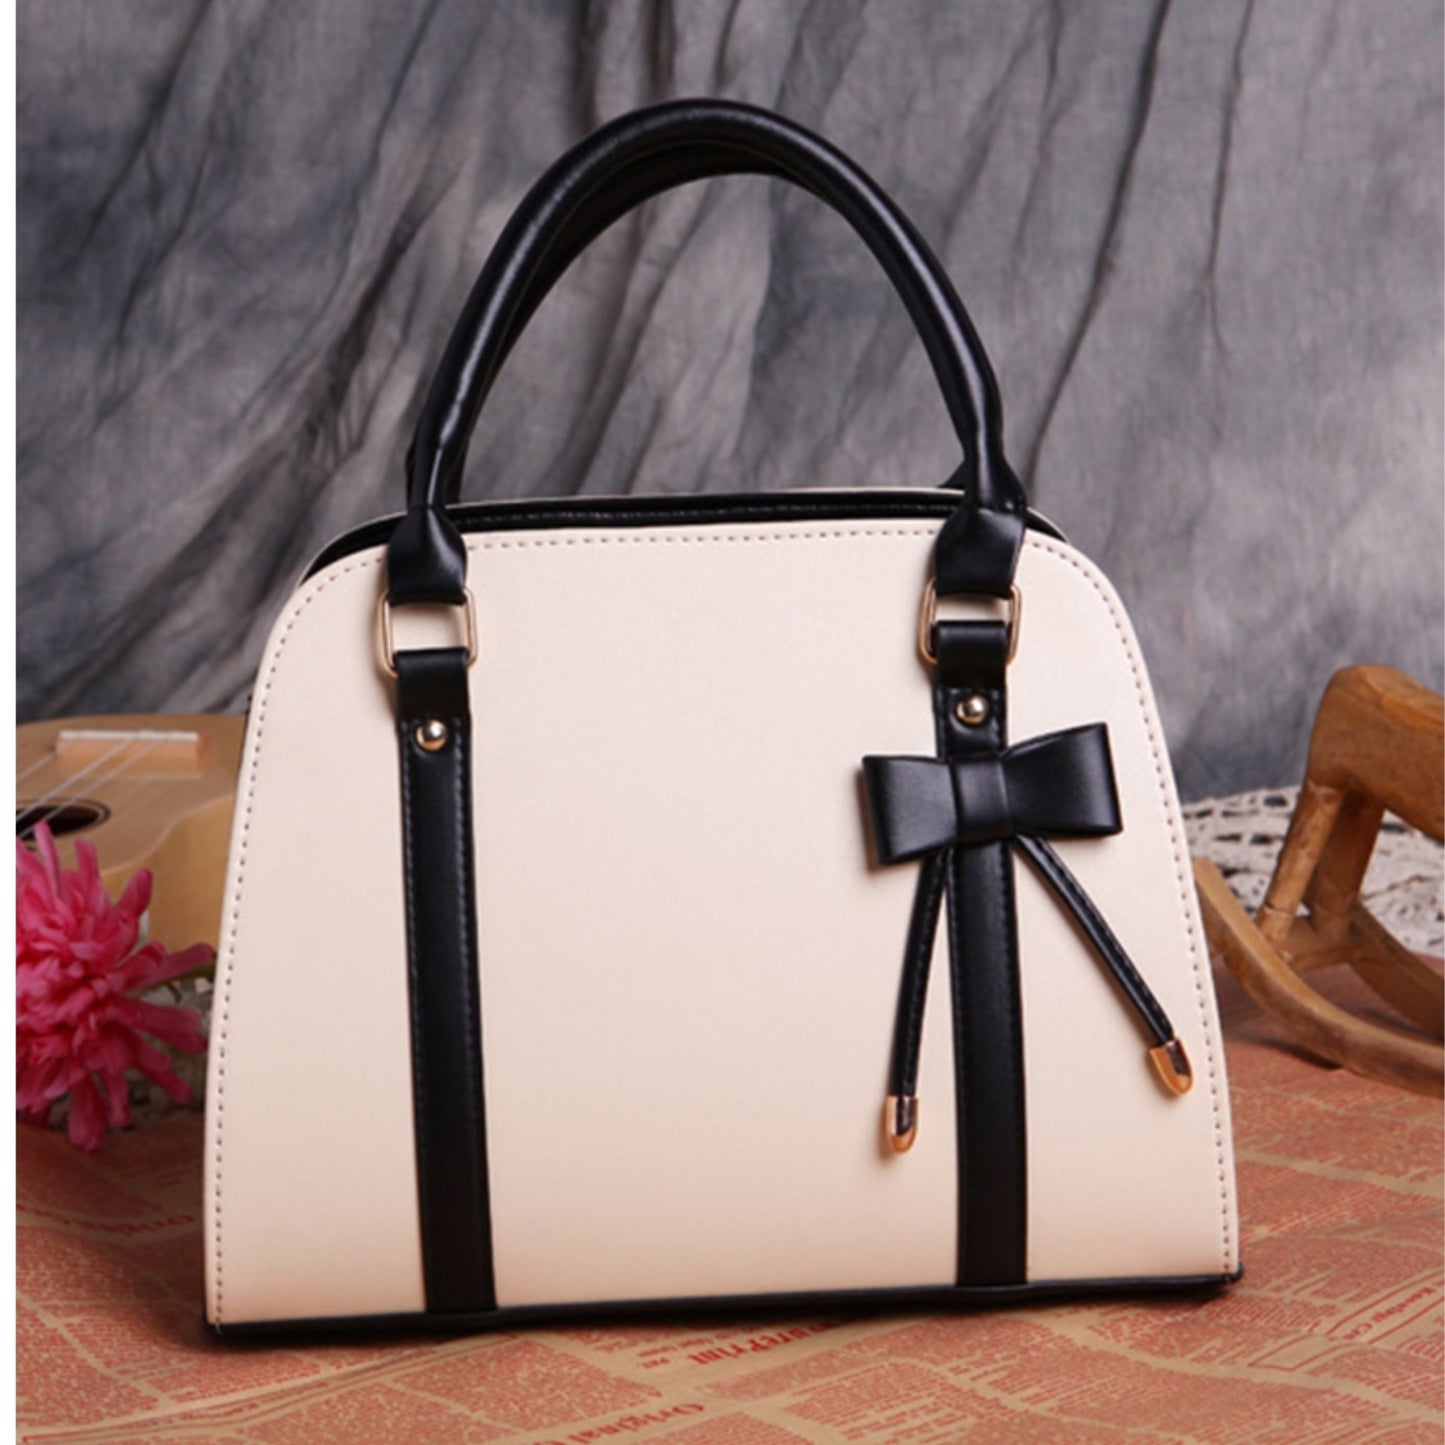 Lovely Classic Purse with Bow Ribbon - BloomBliss.com